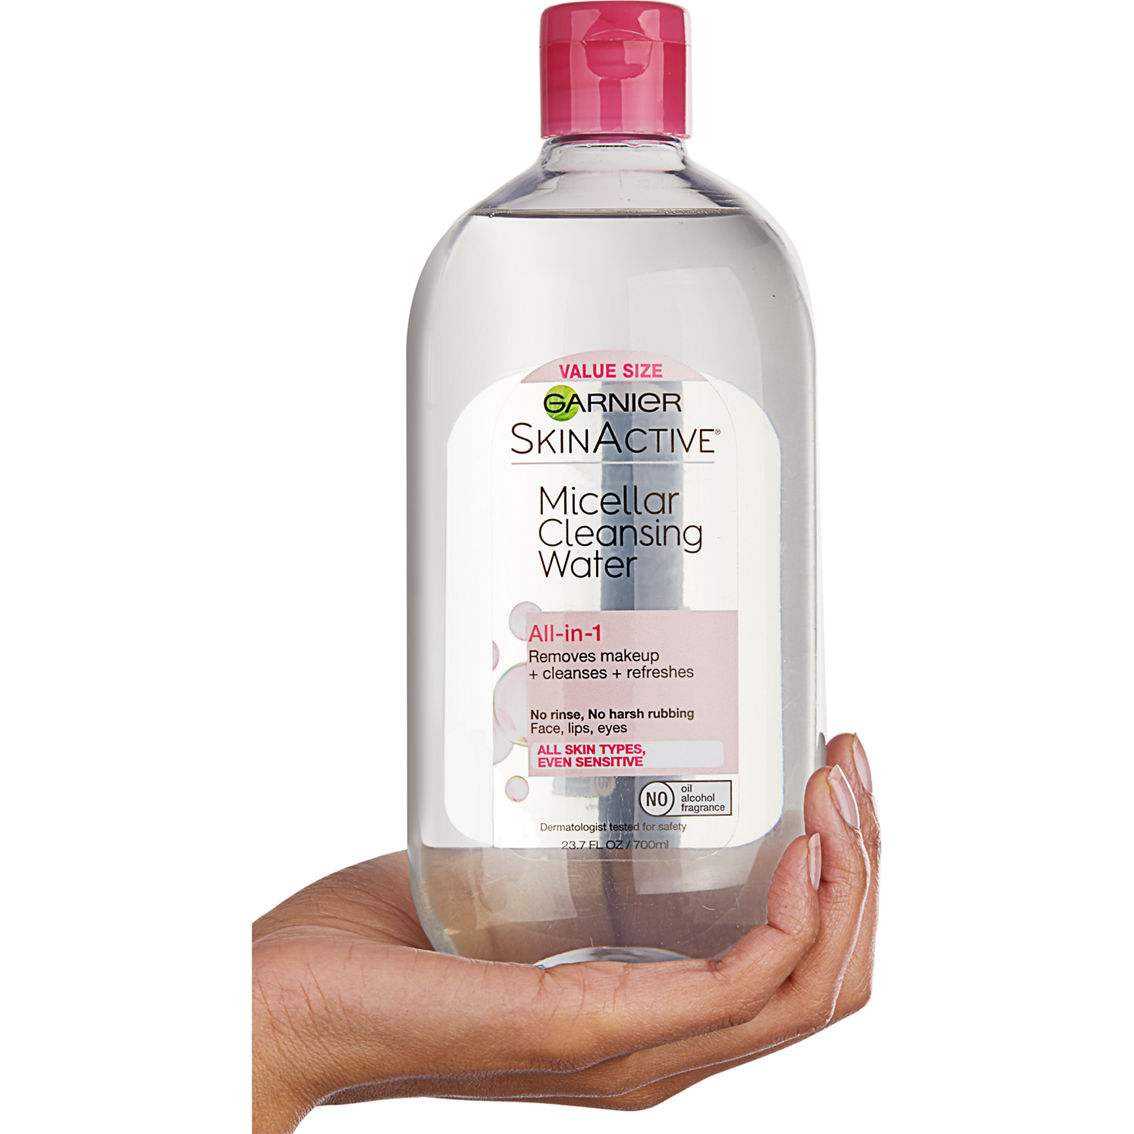 Garnier SkinActive Micellar Cleansing Water For All Skin Types - Image 3 of 3